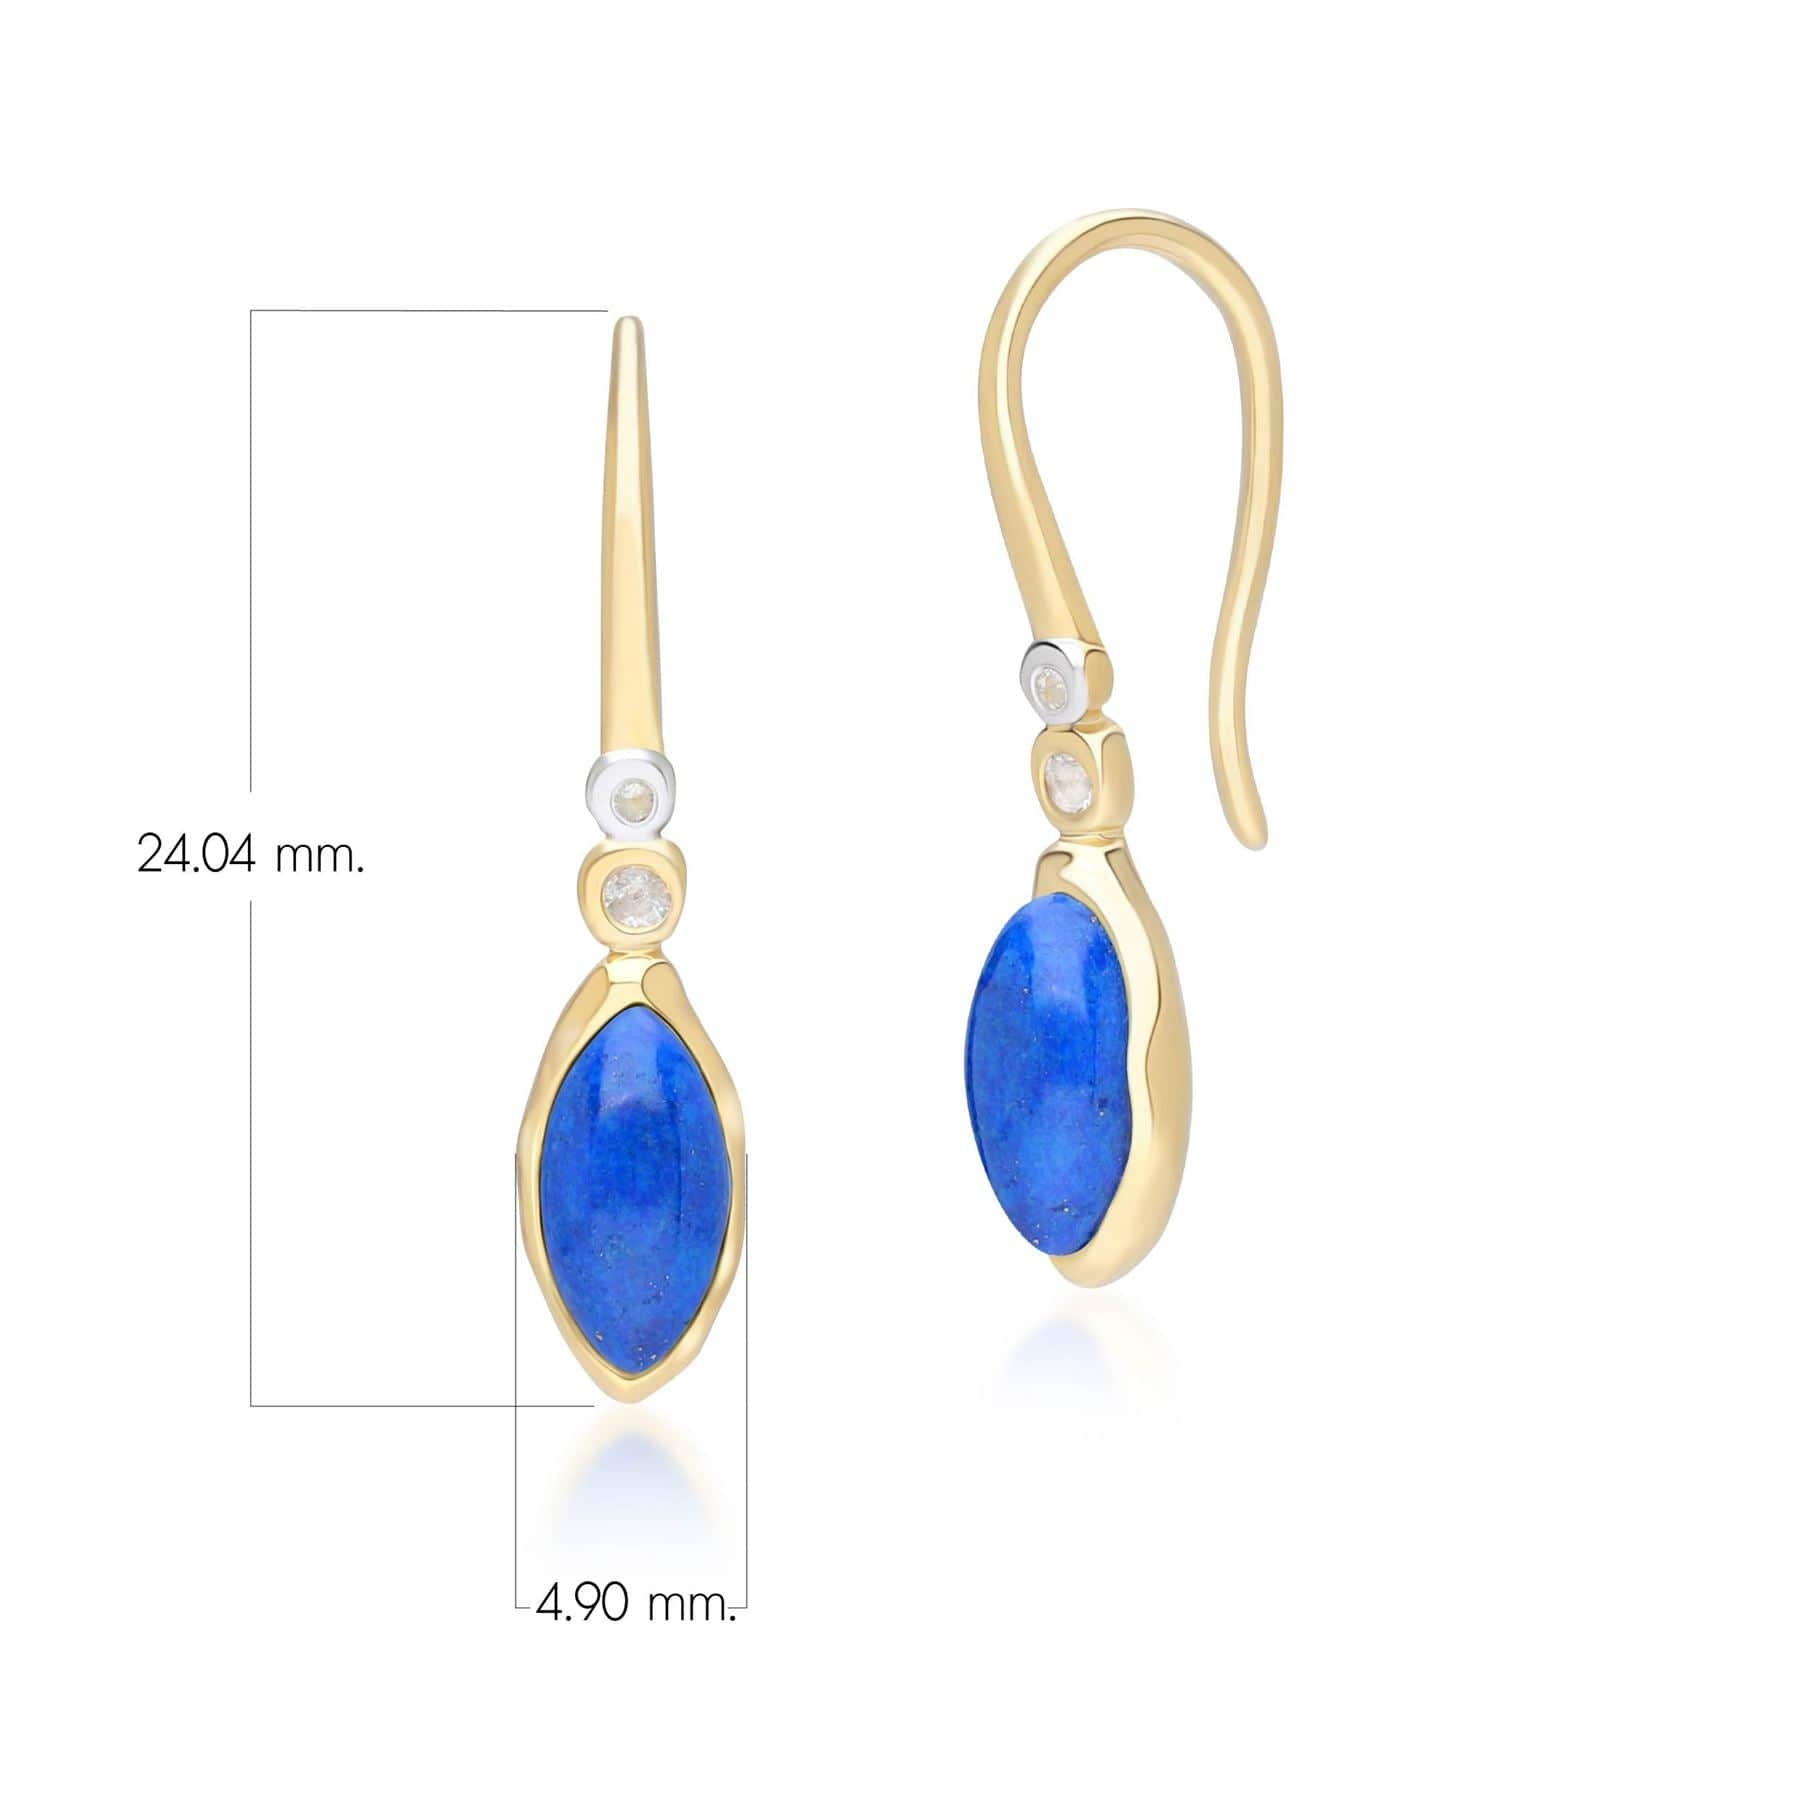 253E418601925 Irregular Marquise Lapis Lazuli & Topaz Drop Earrings In 18ct Gold Plated Sterling Silver Dimensions